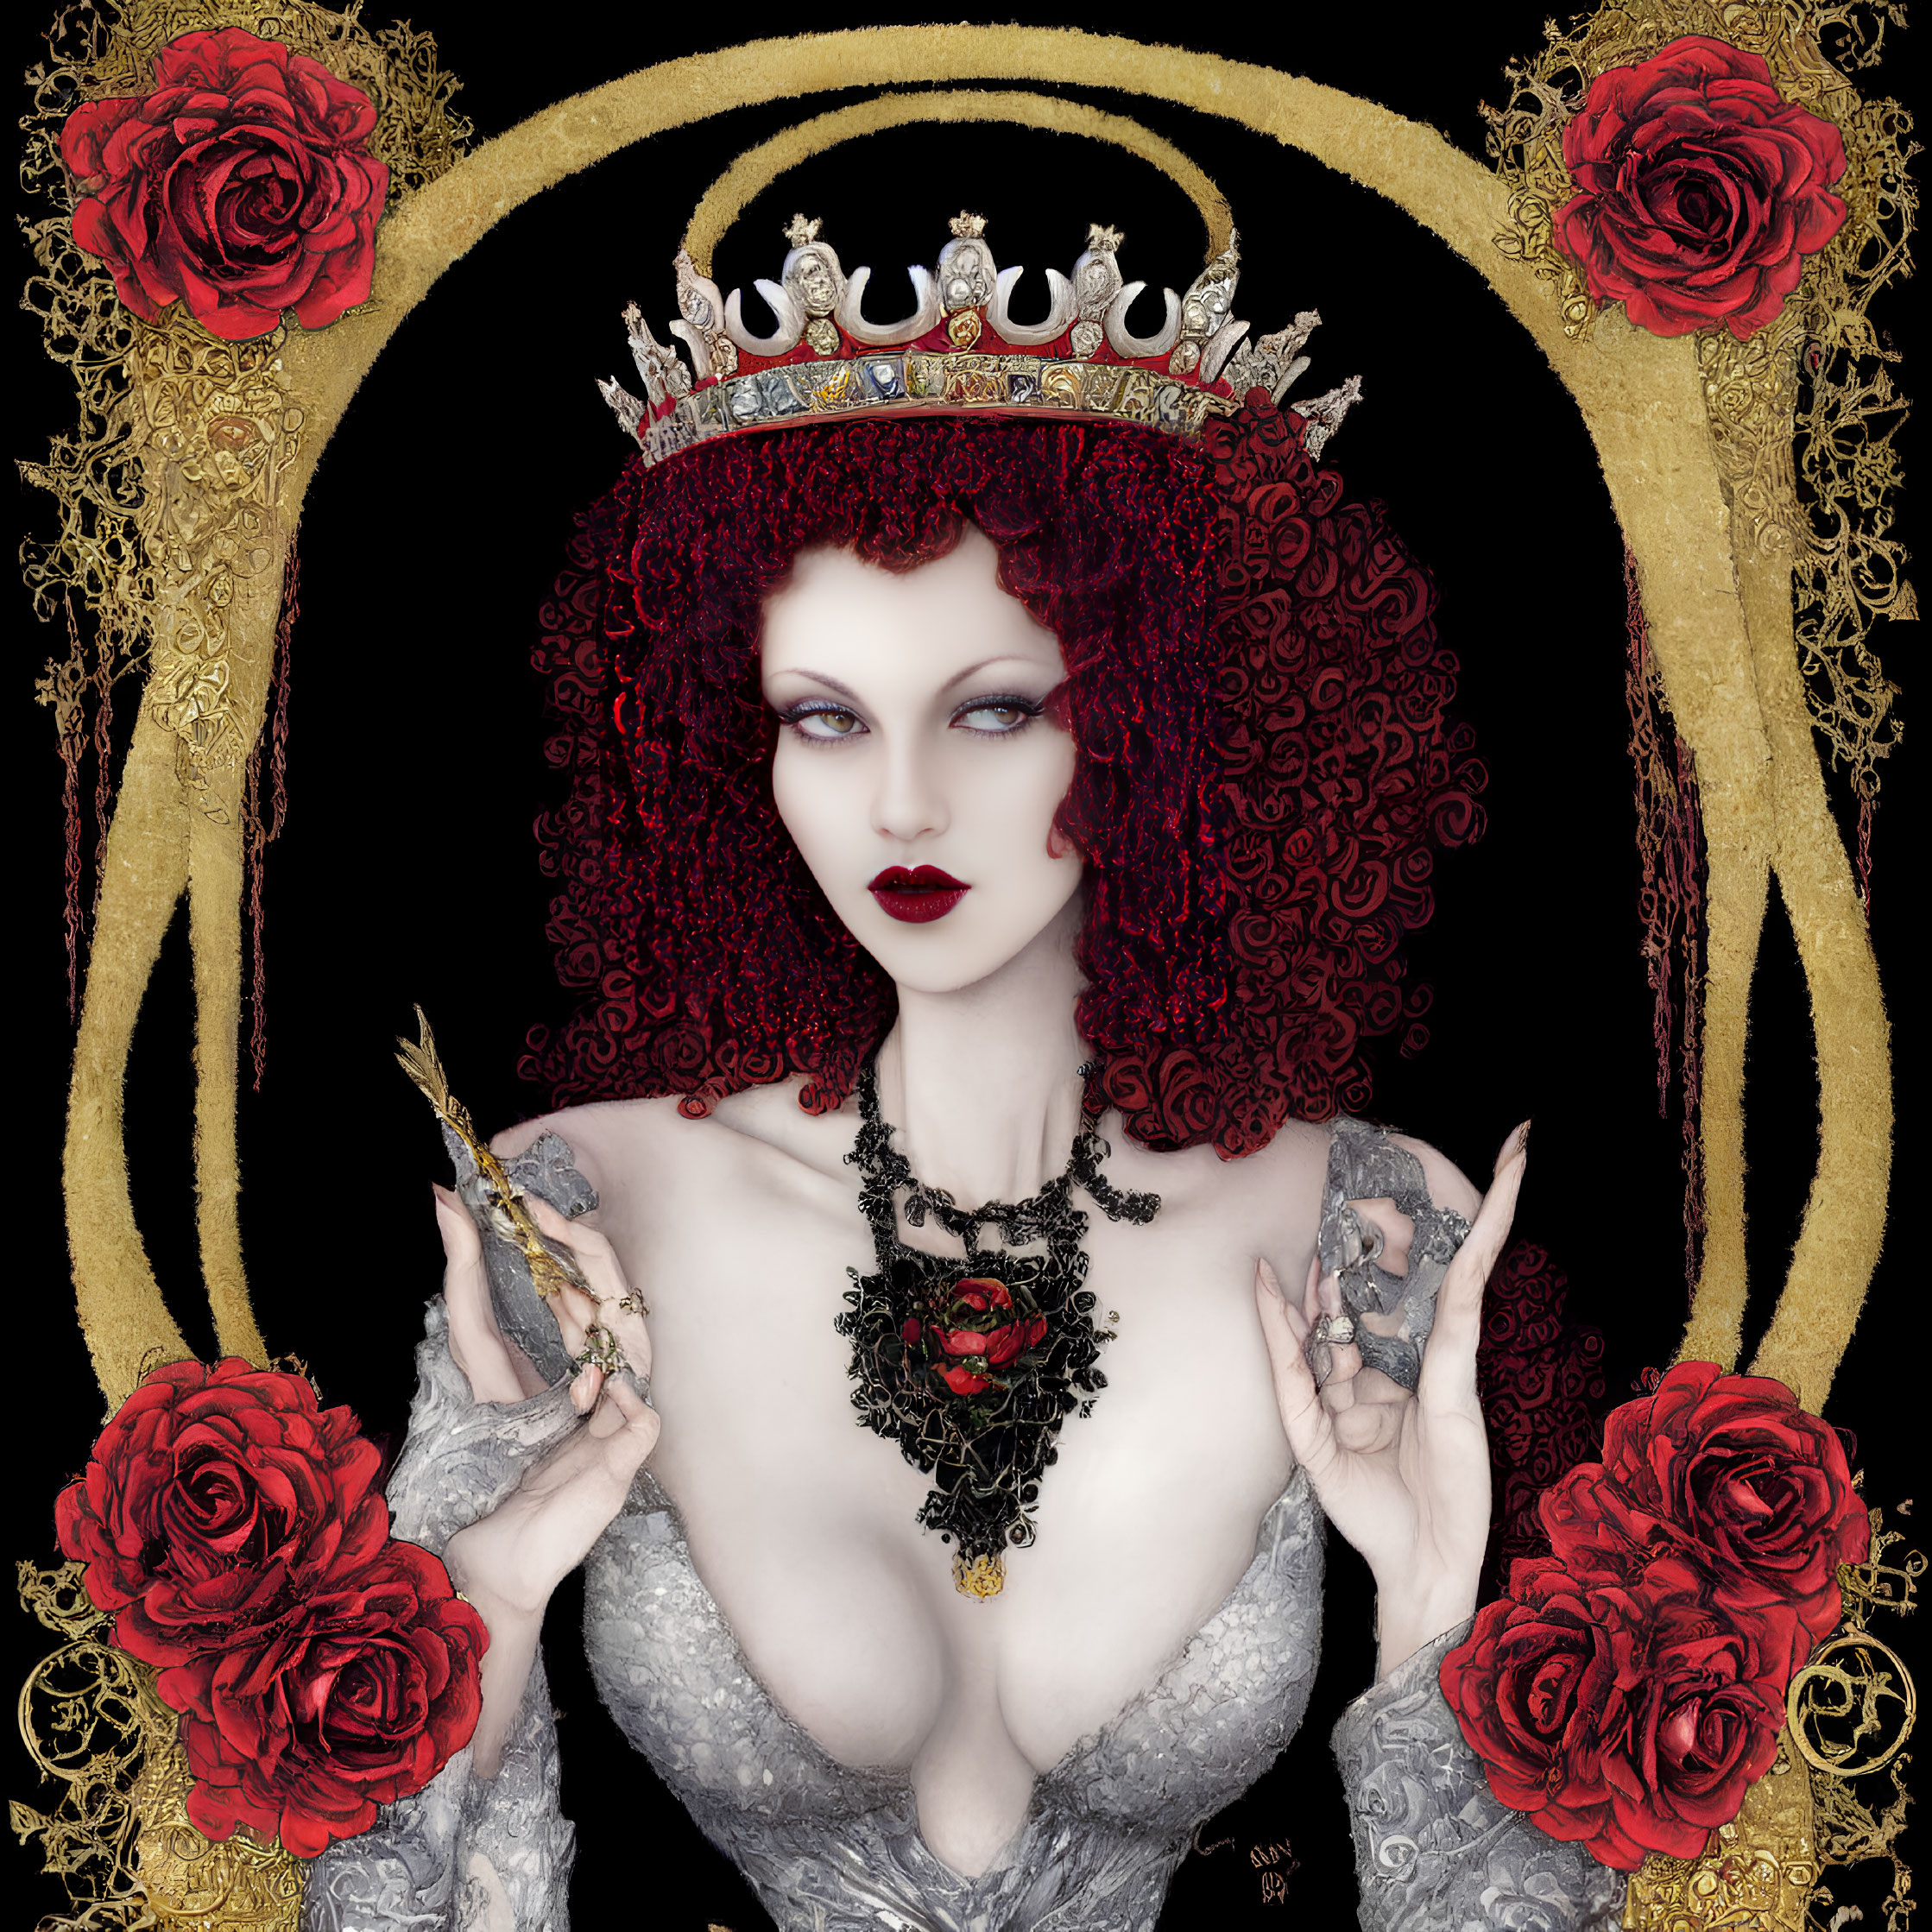 Regal woman with red curly hair and crown in royal setting